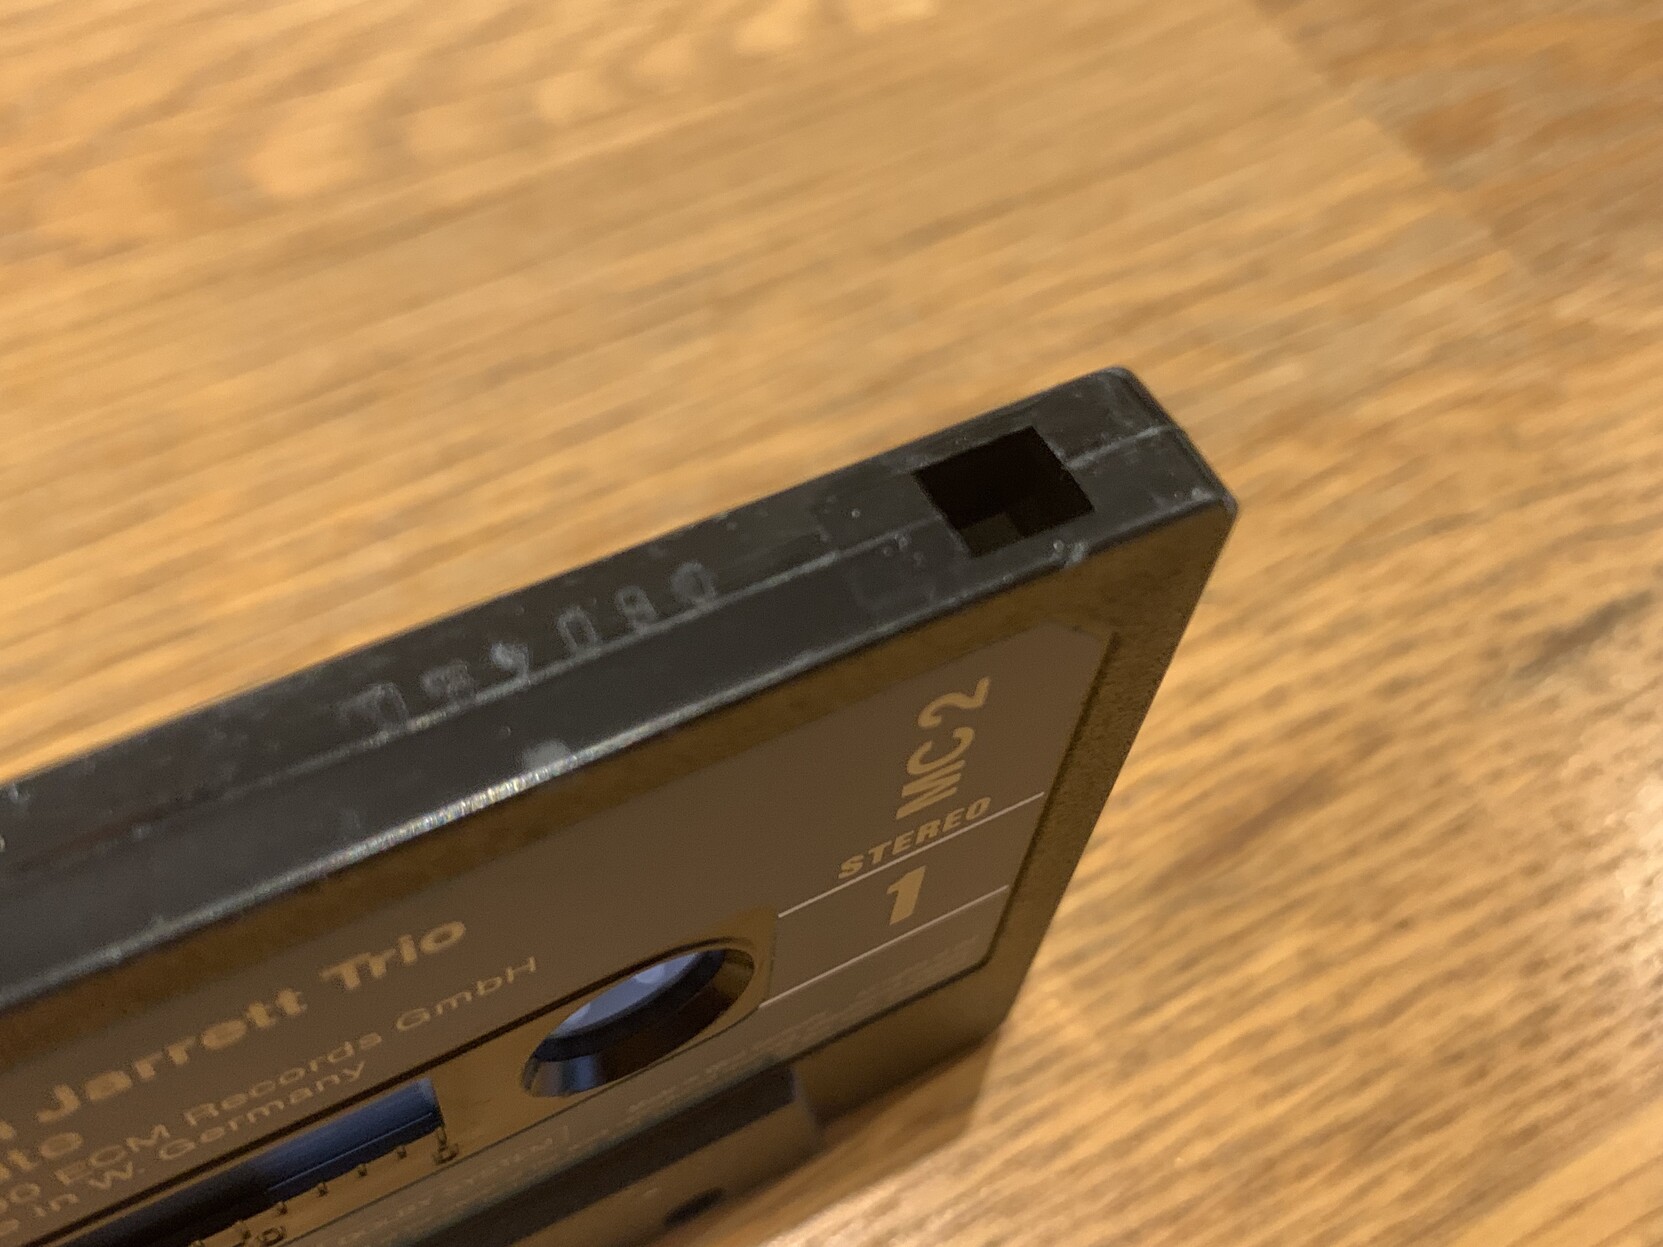 Top side of the cassette showing the write protect notch. 